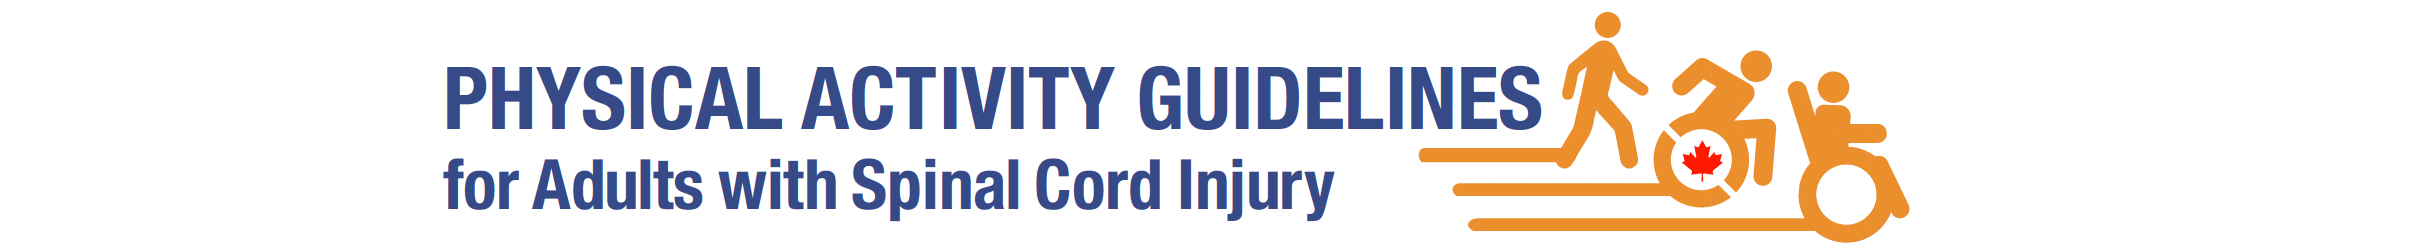 Physical activity guidelines for adults with spinal cord injury logo